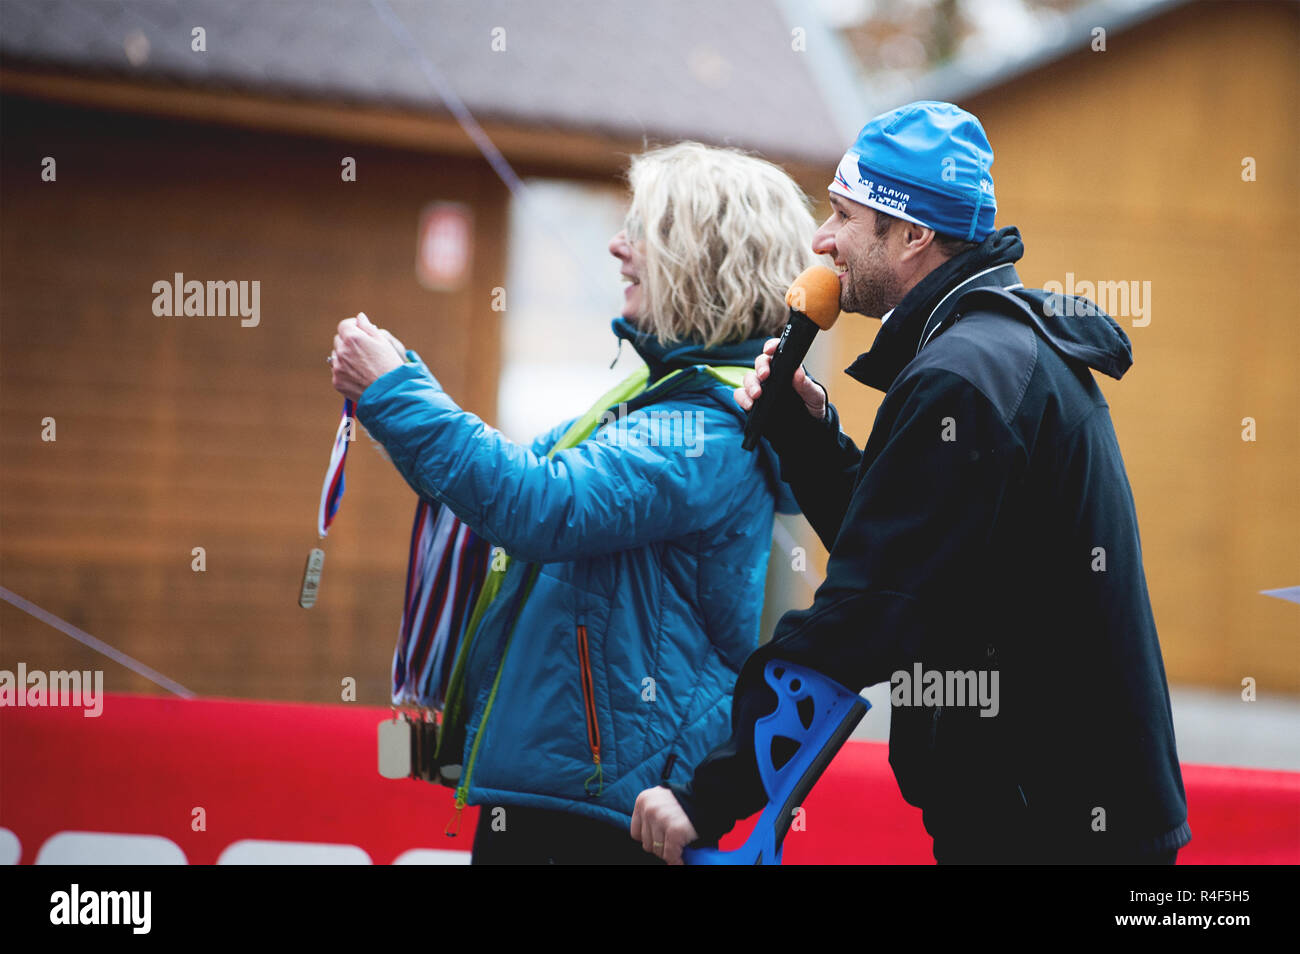 Czech Republic, Pilsen, November 2018: Hannah Pilsen Trail Krkavec. The Moderator and Woman with Medals for the Participants Waiting at the Finish of  Stock Photo